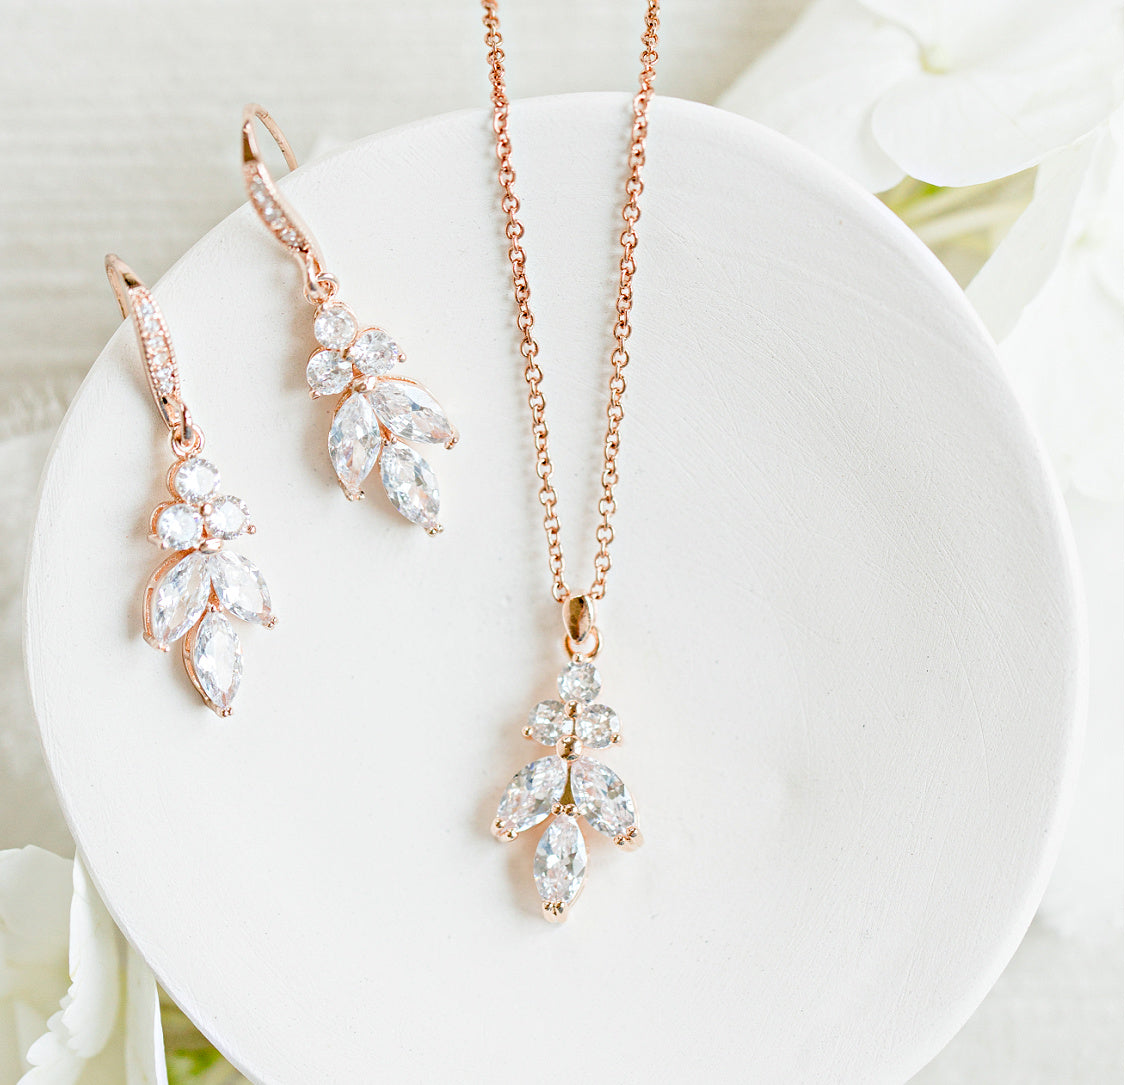 Lulu Bridesmaid - Gold Bridesmaid Necklace and Earring – The Bobby Pin